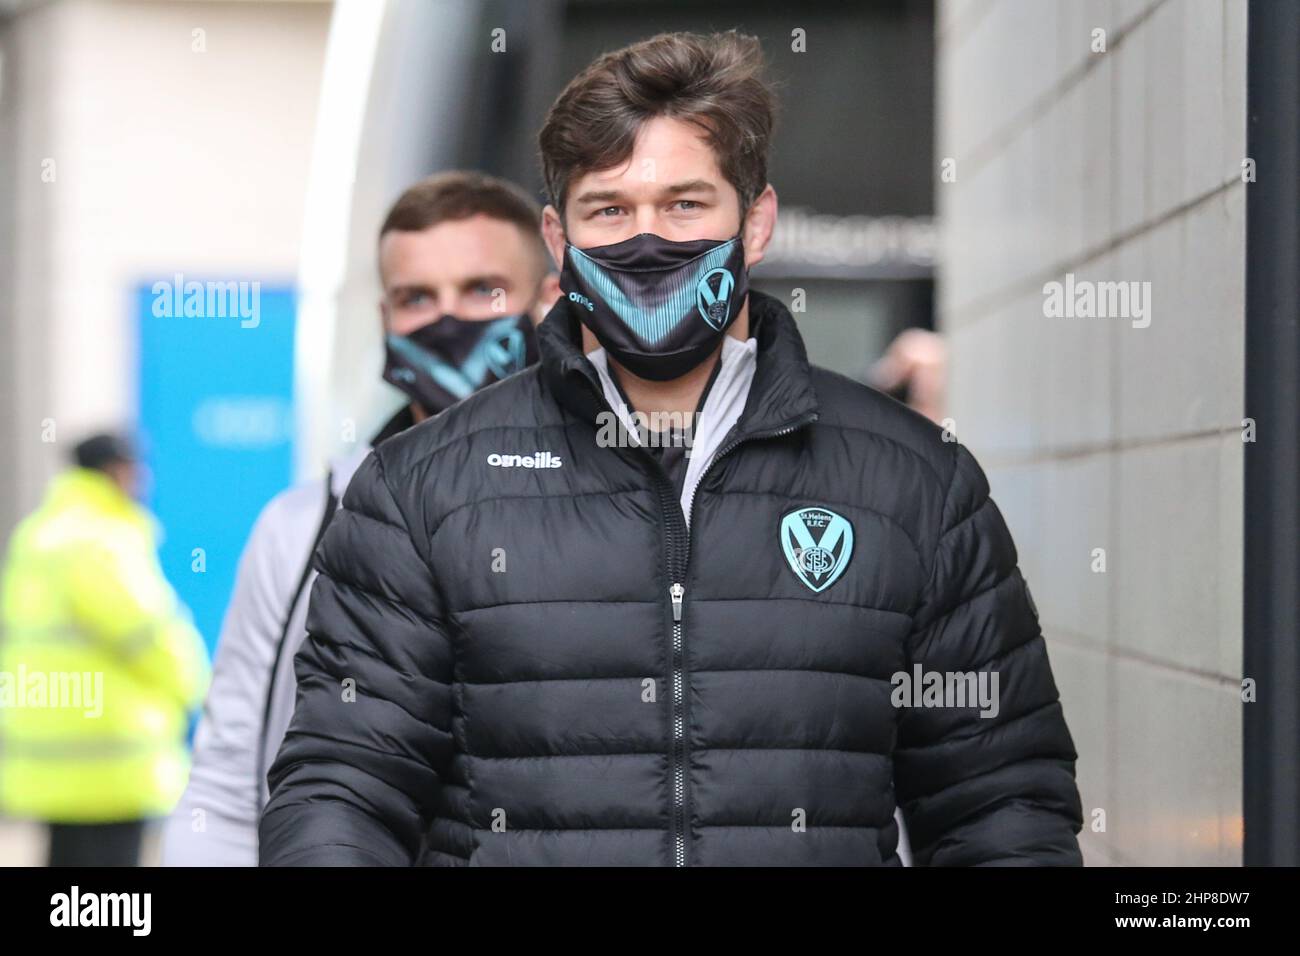 Louie McCarthy-Scarsbrook (15) aus St. Helens kommt am 2/19/2022 im MKM-Stadion in an. (Foto von David Greaves/News Images/Sipa USA) Quelle: SIPA USA/Alamy Live News Stockfoto